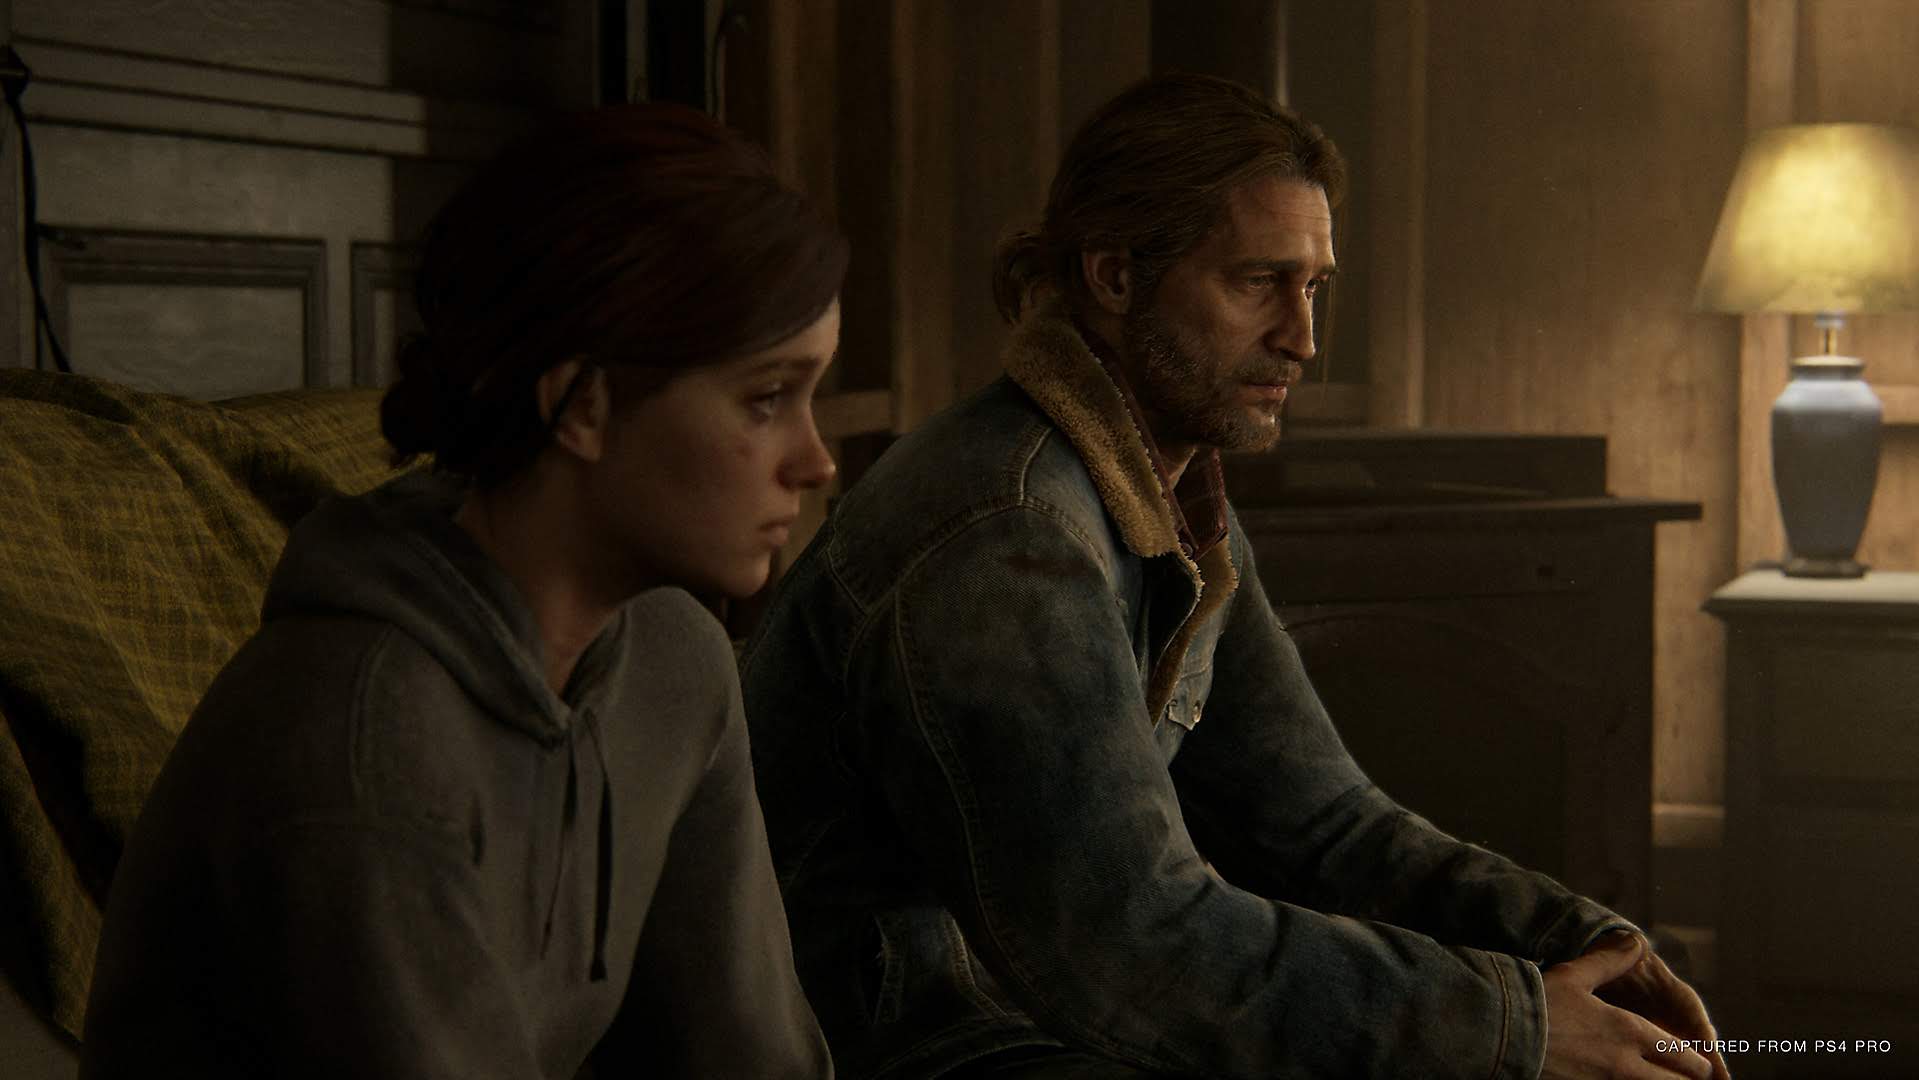 The Last of Us: Original voice actor says he's caught 'off guard